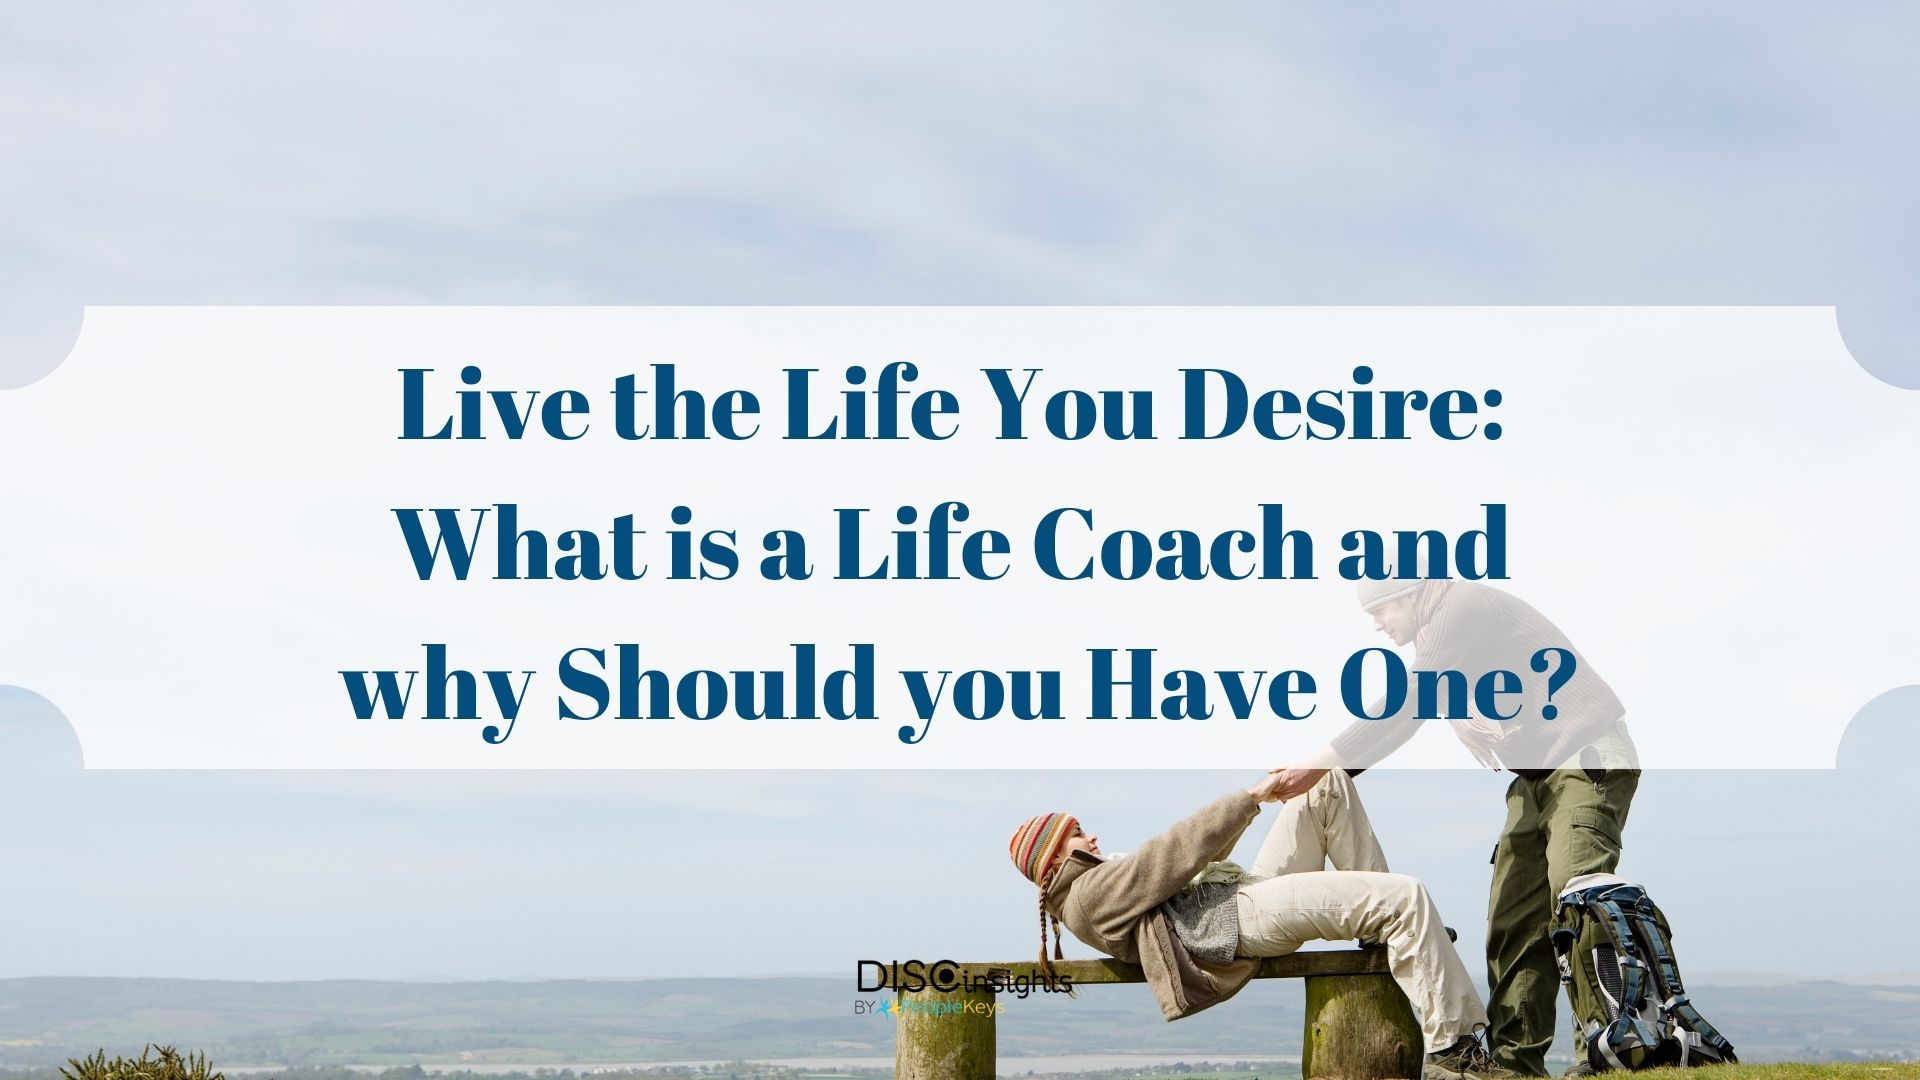  Live the Life You Desire: What is a life coach and why should you have one?